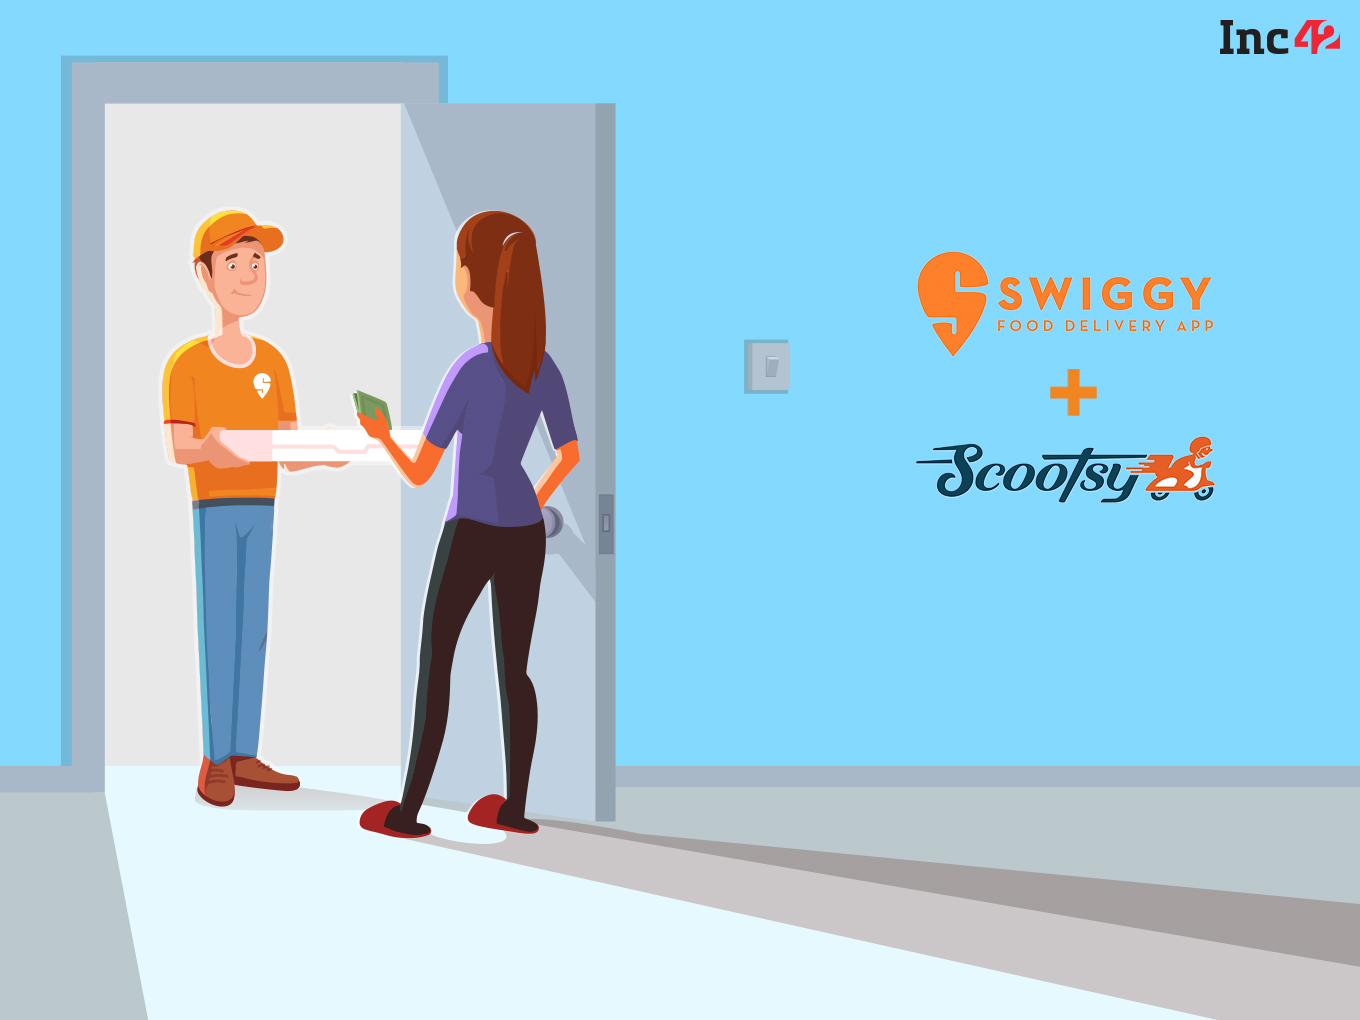 Swiggy Acquires On-demand Delivery Platform Scootsy